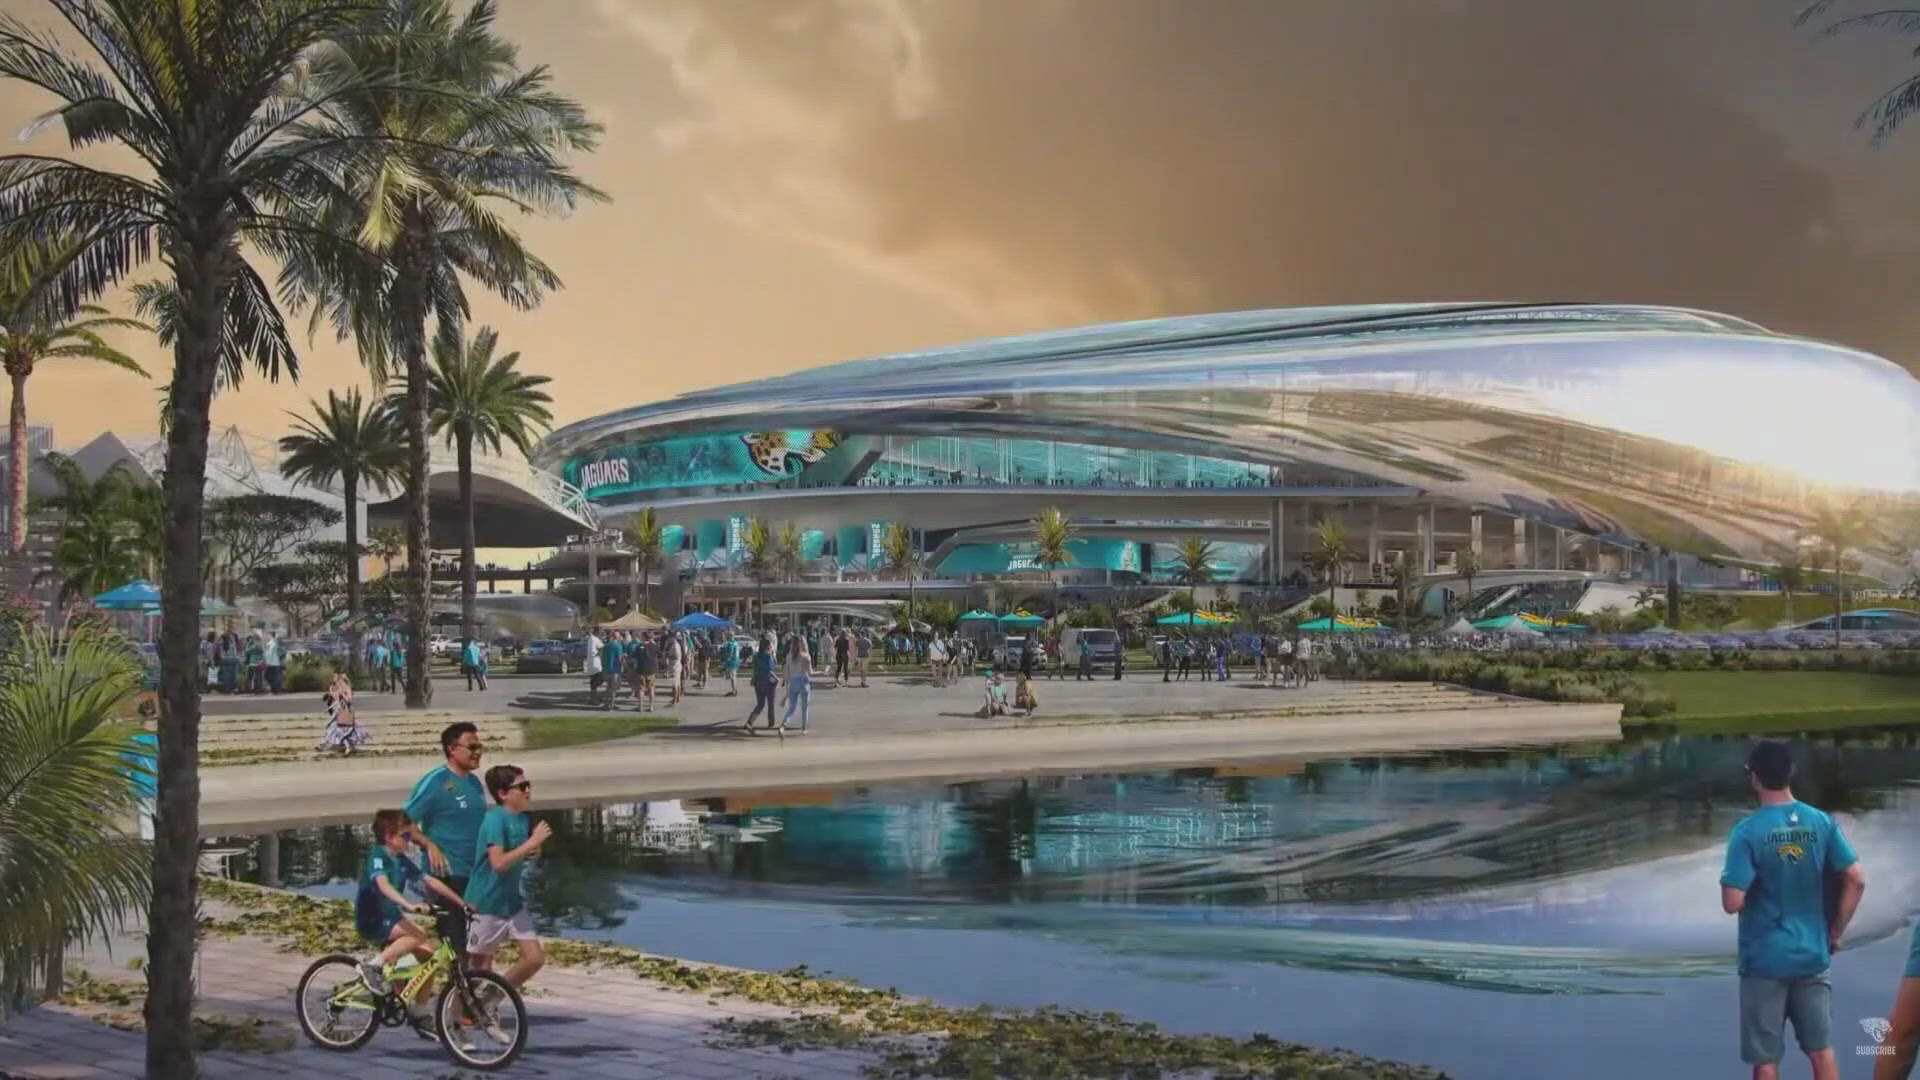 The project cost is estimated at $1.4 billion which will be split between the City of Jacksonville and the Jaguars.